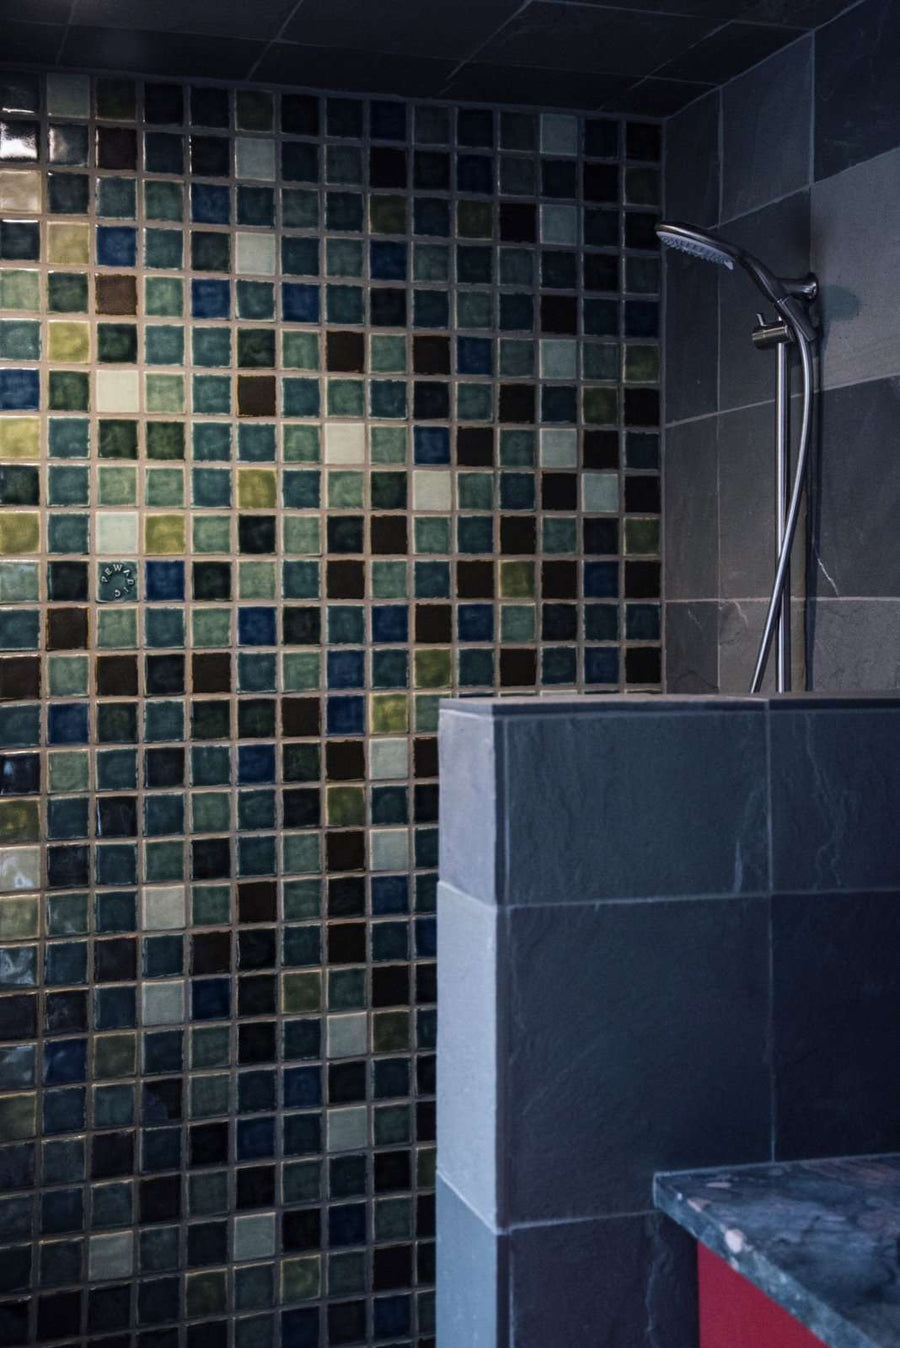 Further from the mosaic of color, there is a half wall with large dark gray marbled stone tile.